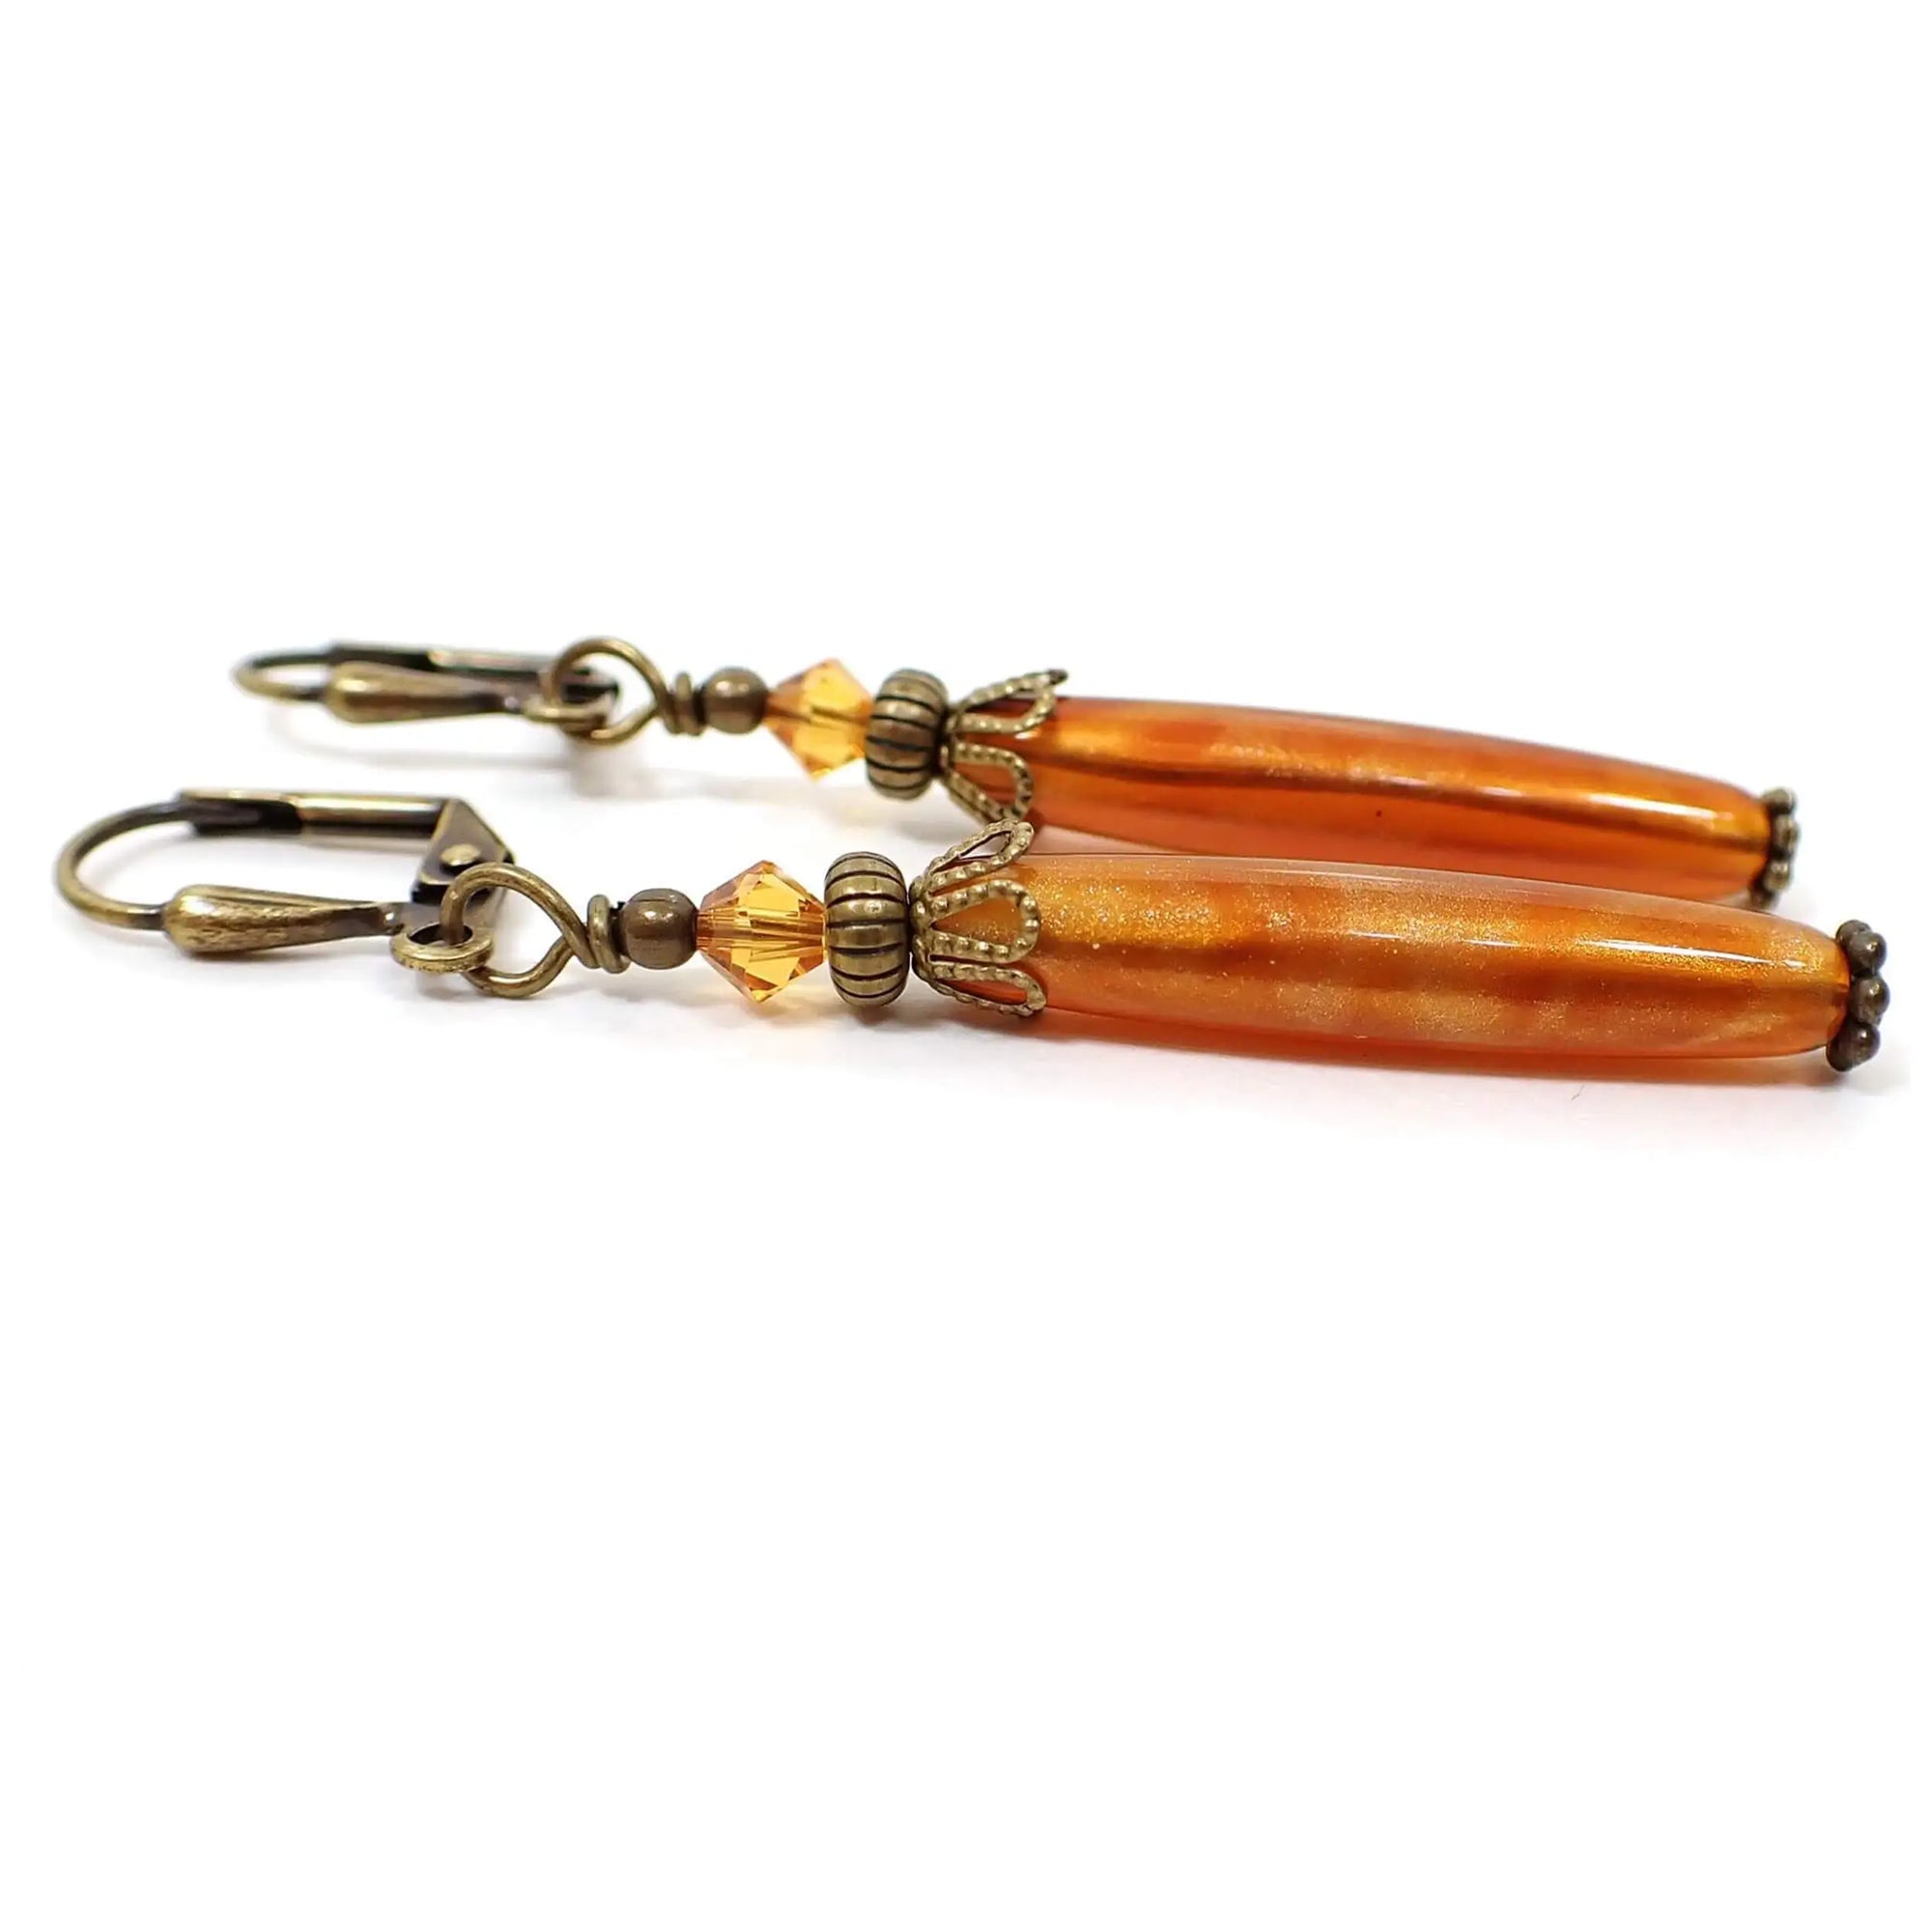 Side view of the handmade lucite stick earrings. The metal is antiqued brass in color. There are faceted glass crystals in a lighter orange at the top. The bottom lucite beads are round stick shaped and have orange marbled with metallic gold colors.